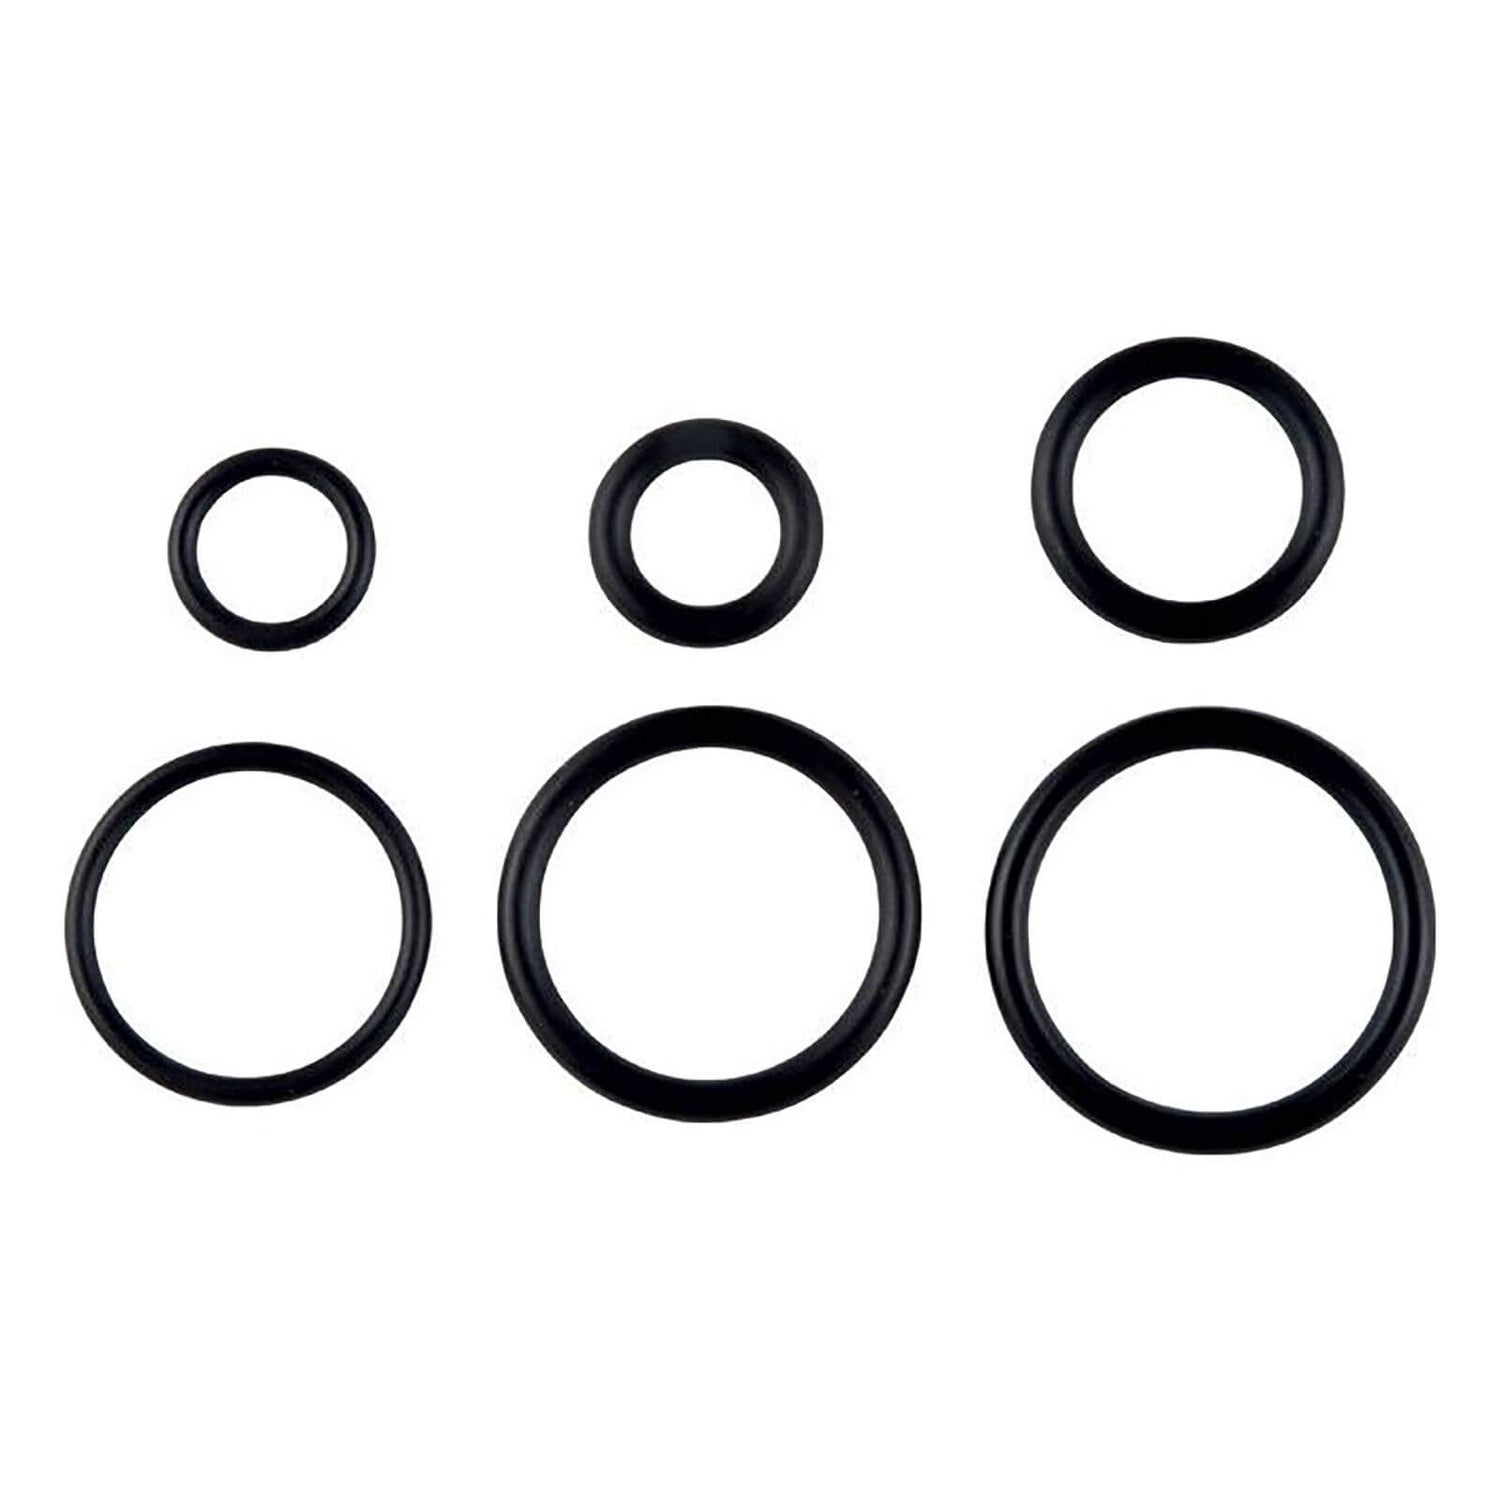 SMALL O RINGS ASSORTED